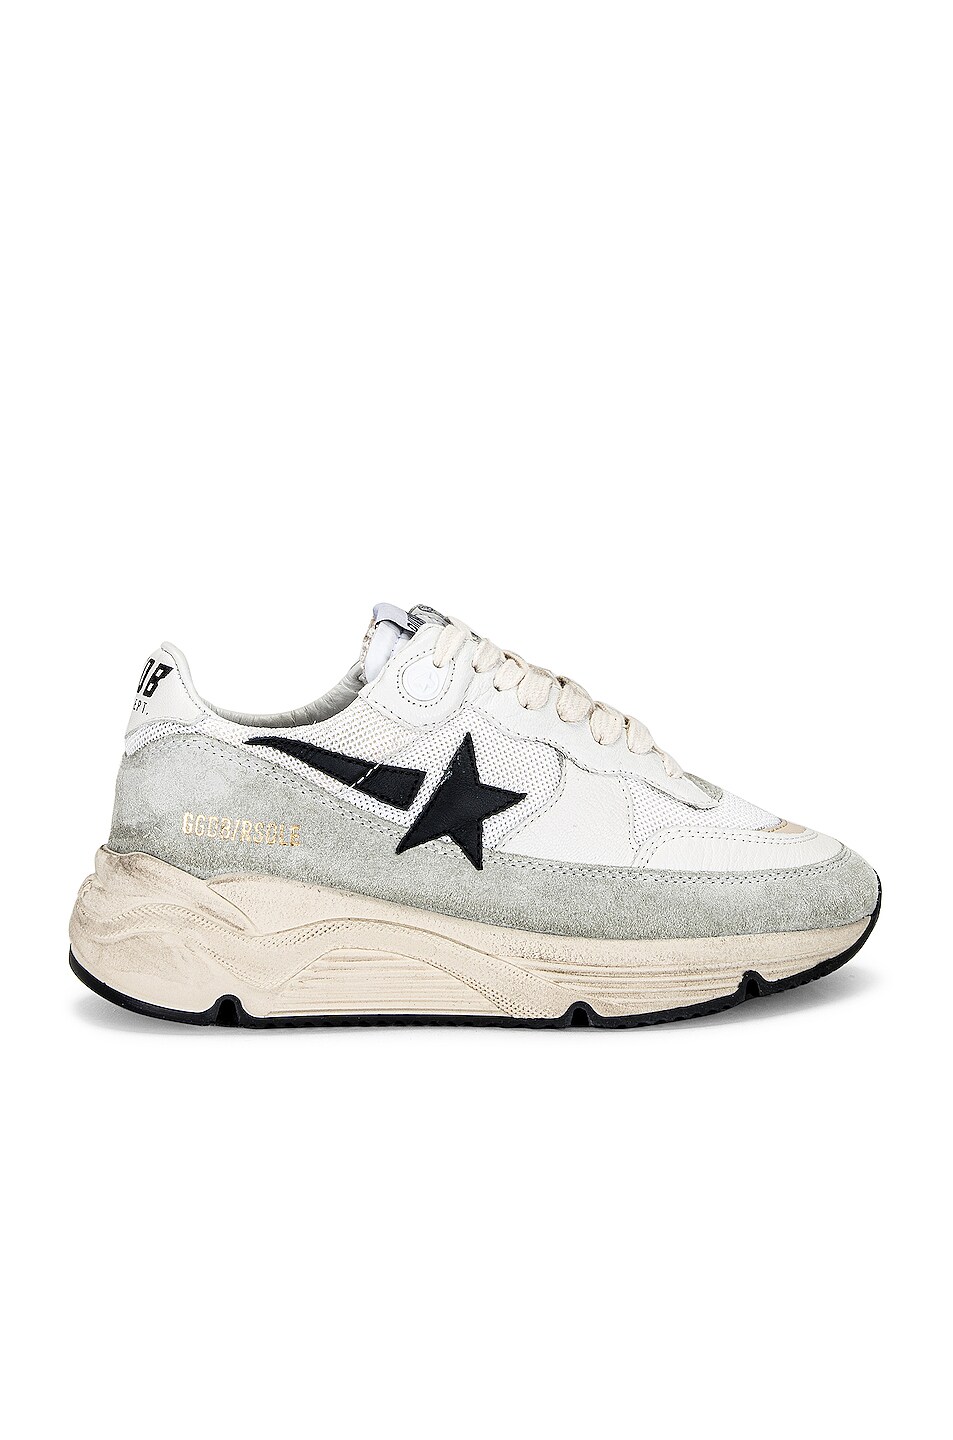 Image 1 of Golden Goose Running Sole Sneaker in White, Ivory, Black, & Ice